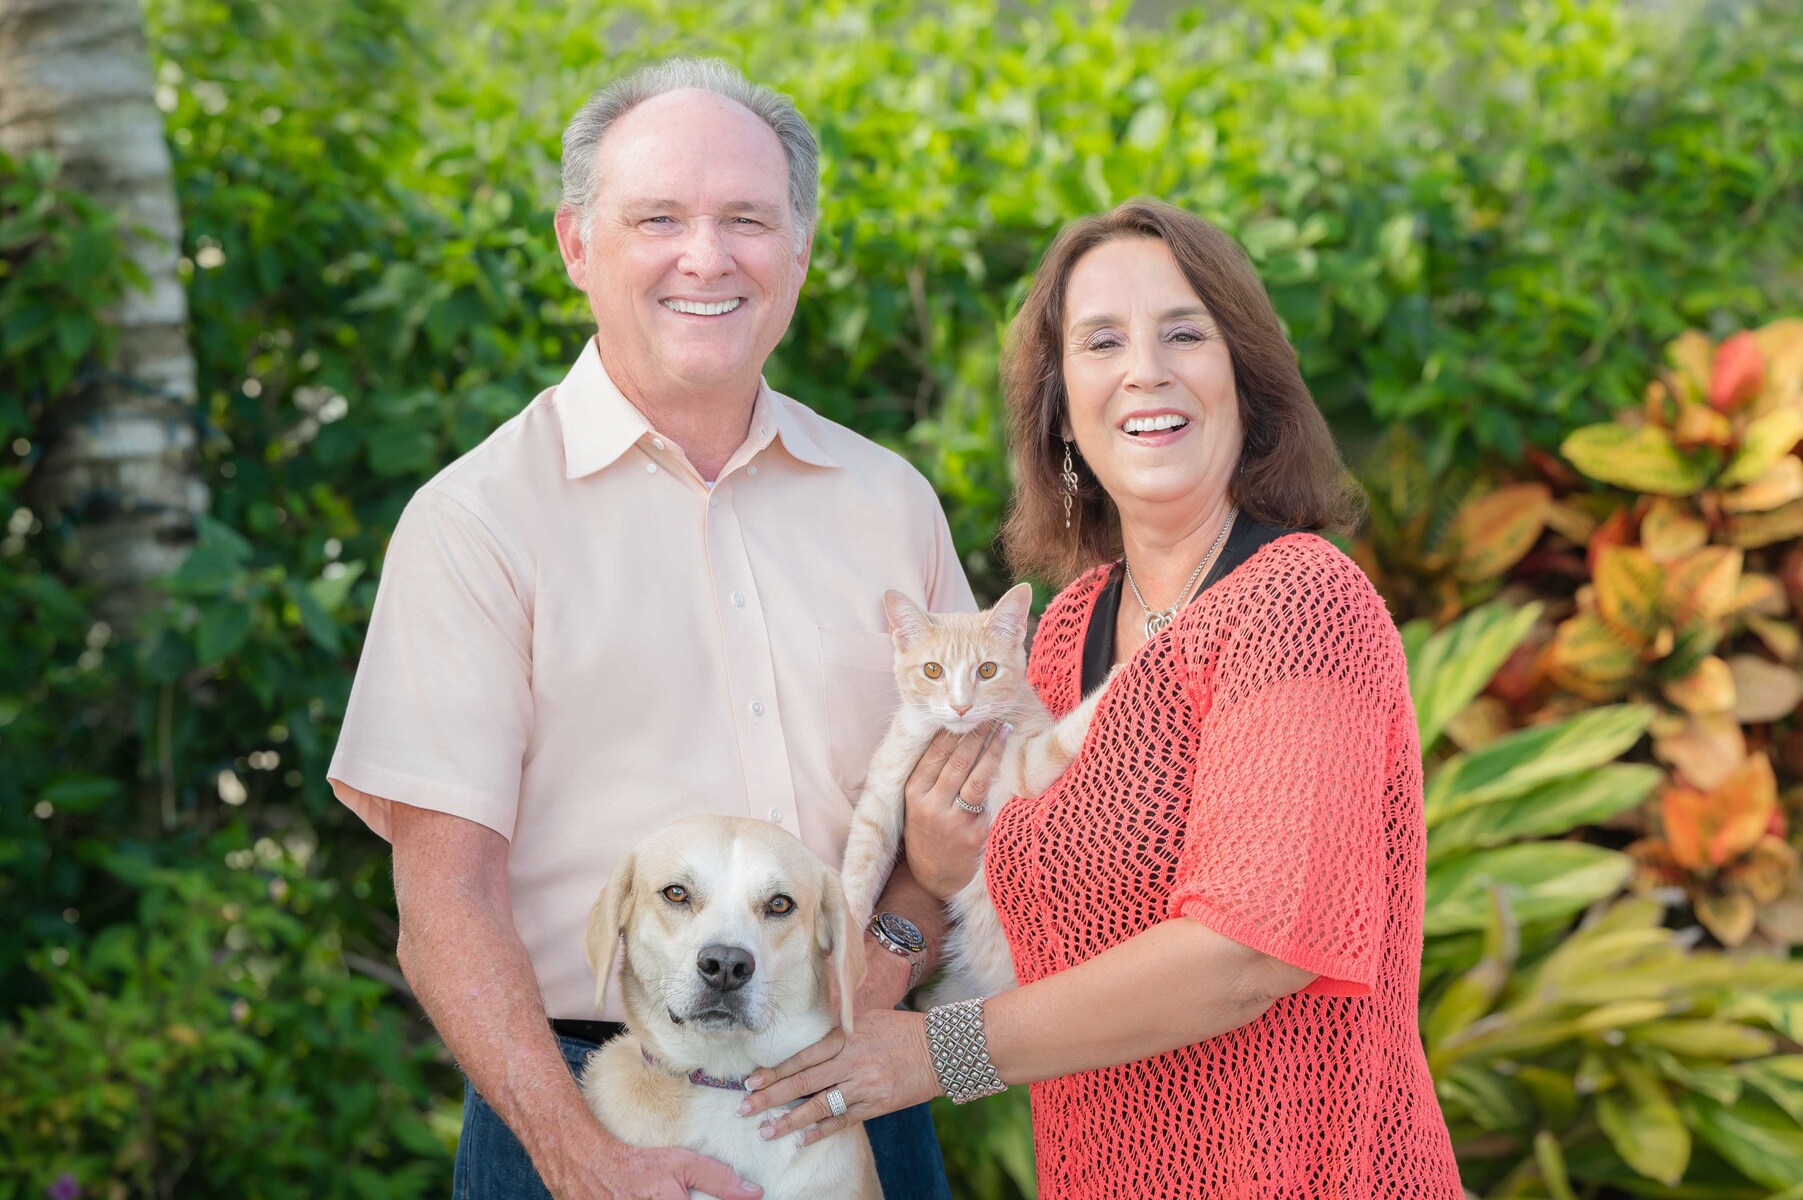 We specialize in family portraits and pet photography.